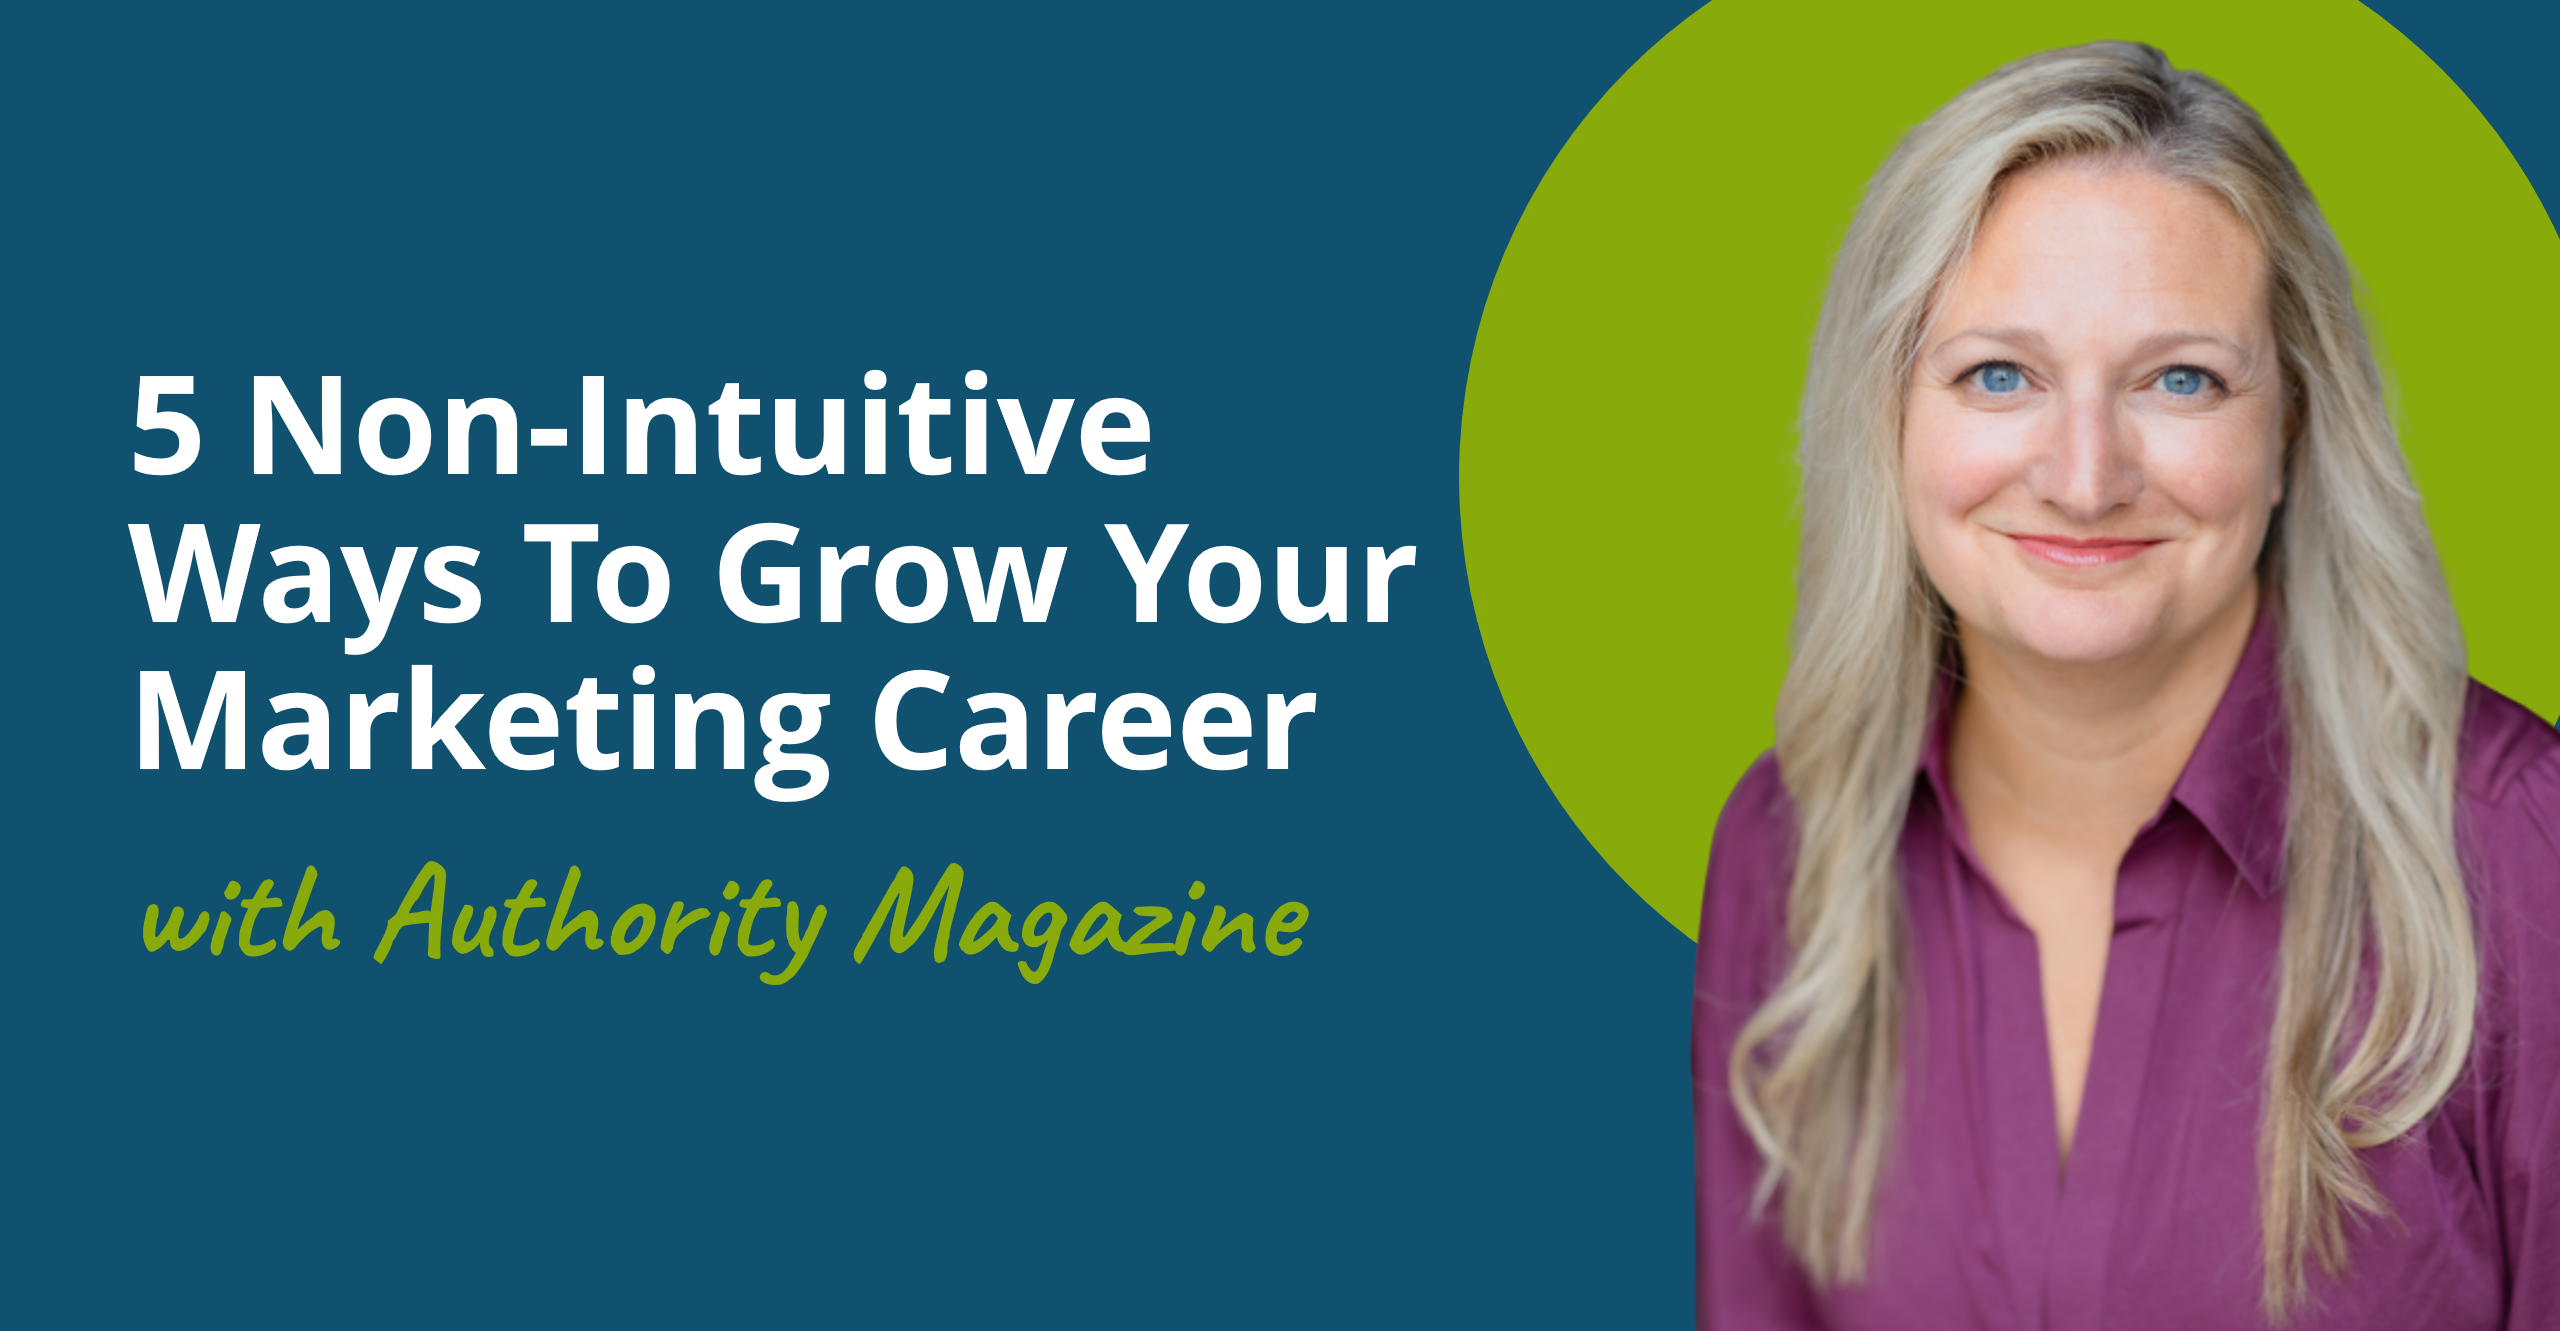 TPC Contributes to Authority Magazine: 5 Non-Intuitive Ways To Grow Your Marketing Career